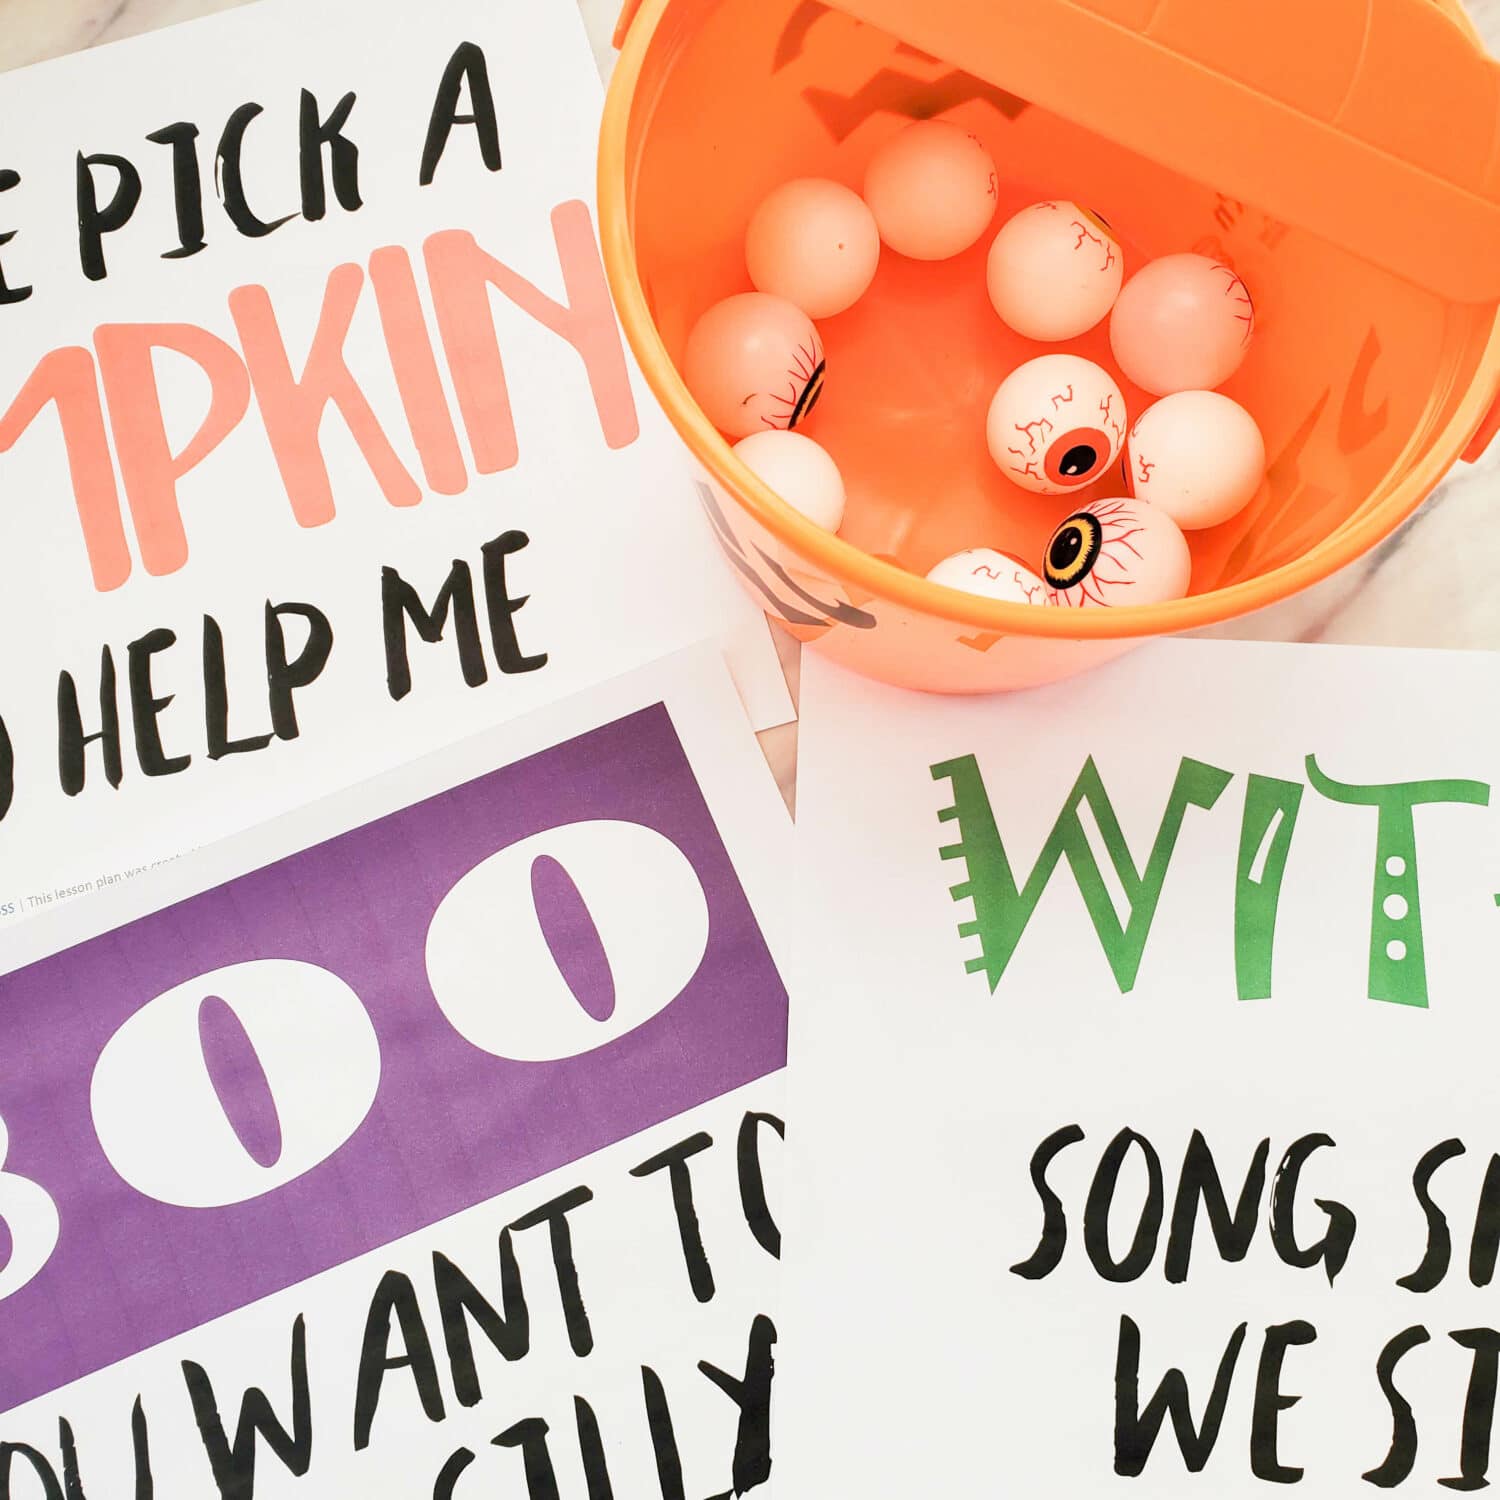 Halloween Bucket Toss Singing Time game with cute ways to pick out Primary songs to sing and even a gross texture fun idea to mix it up! LDS Primary Music Leader singing time ideas with printable song helps.